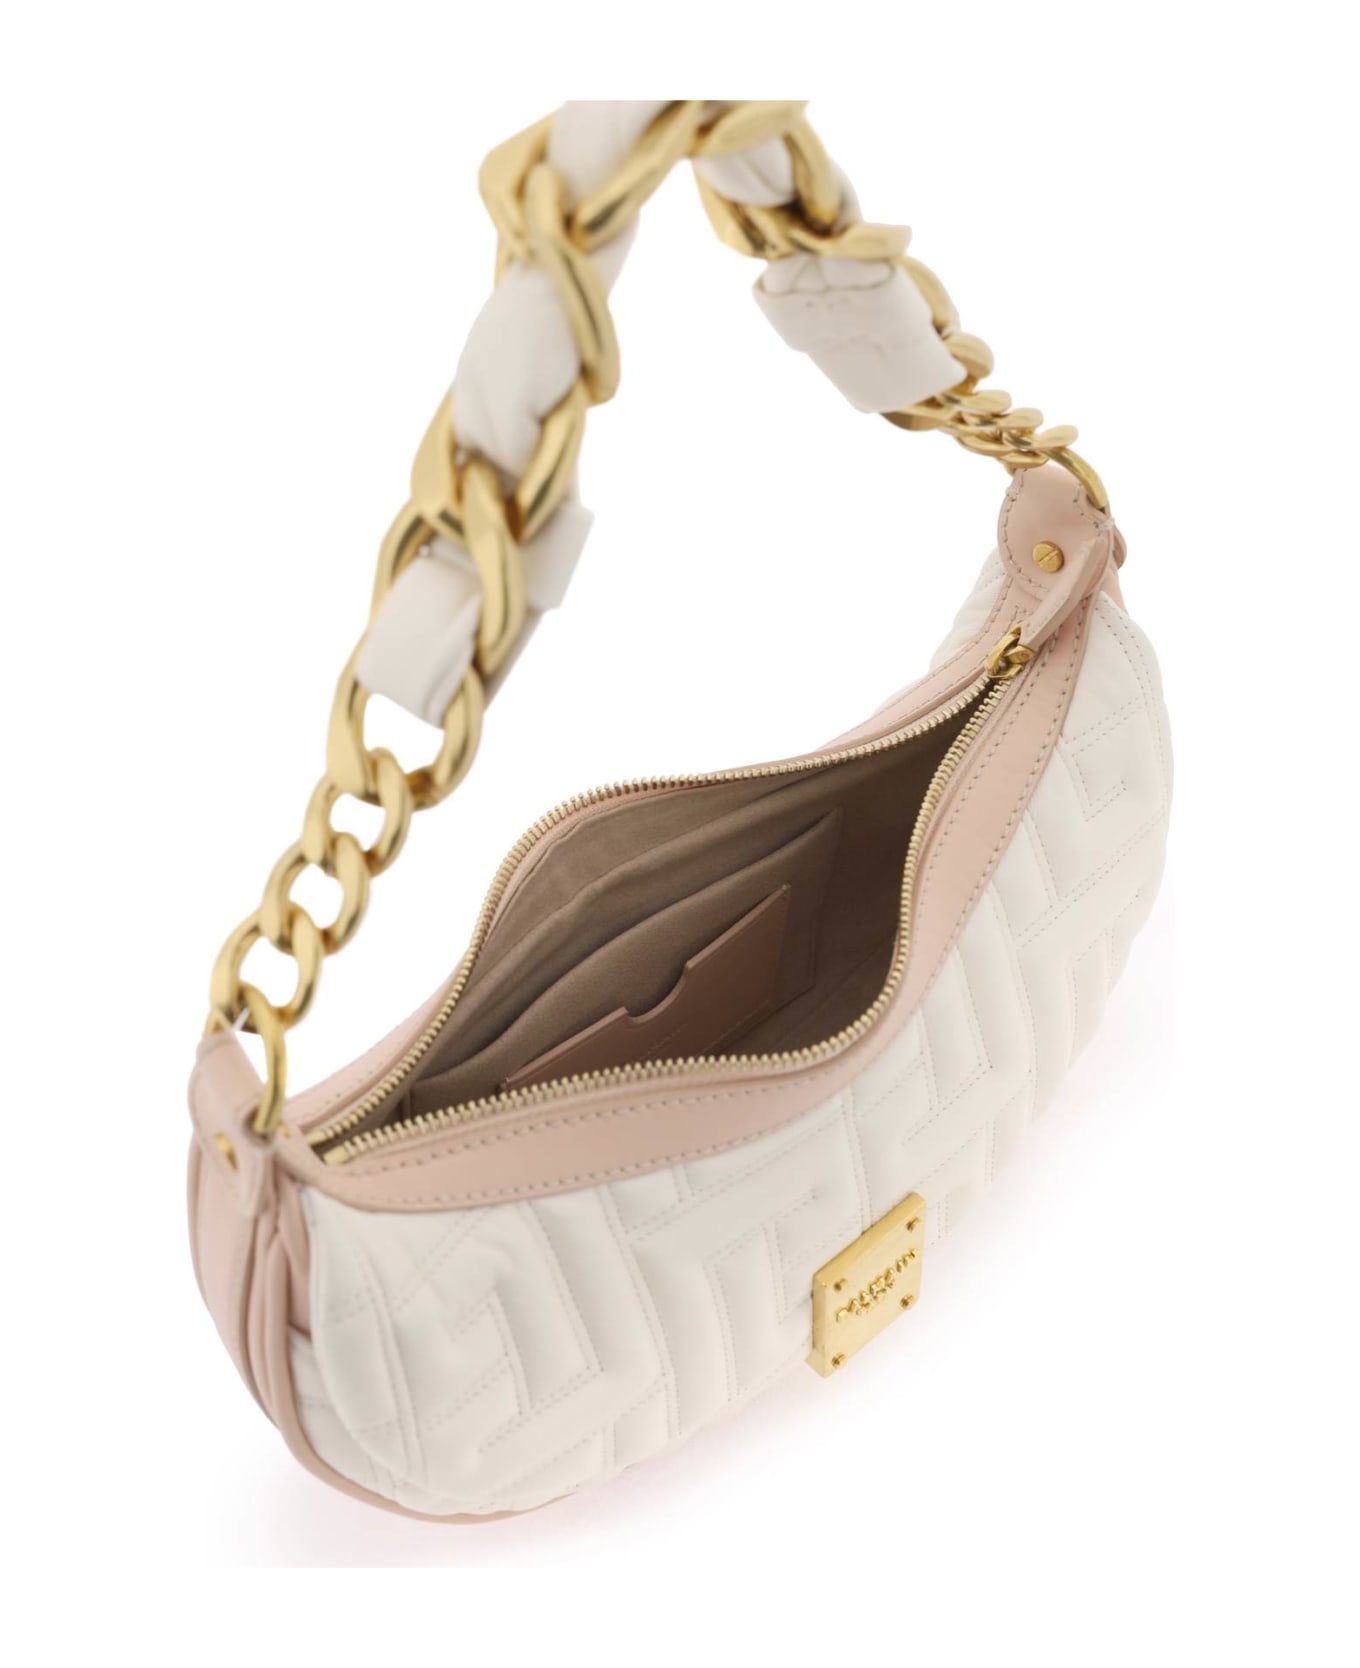 Balmain 1945 Soft Quilted Leather Hobo Bag - CREME NUDE ROSÉ (White)